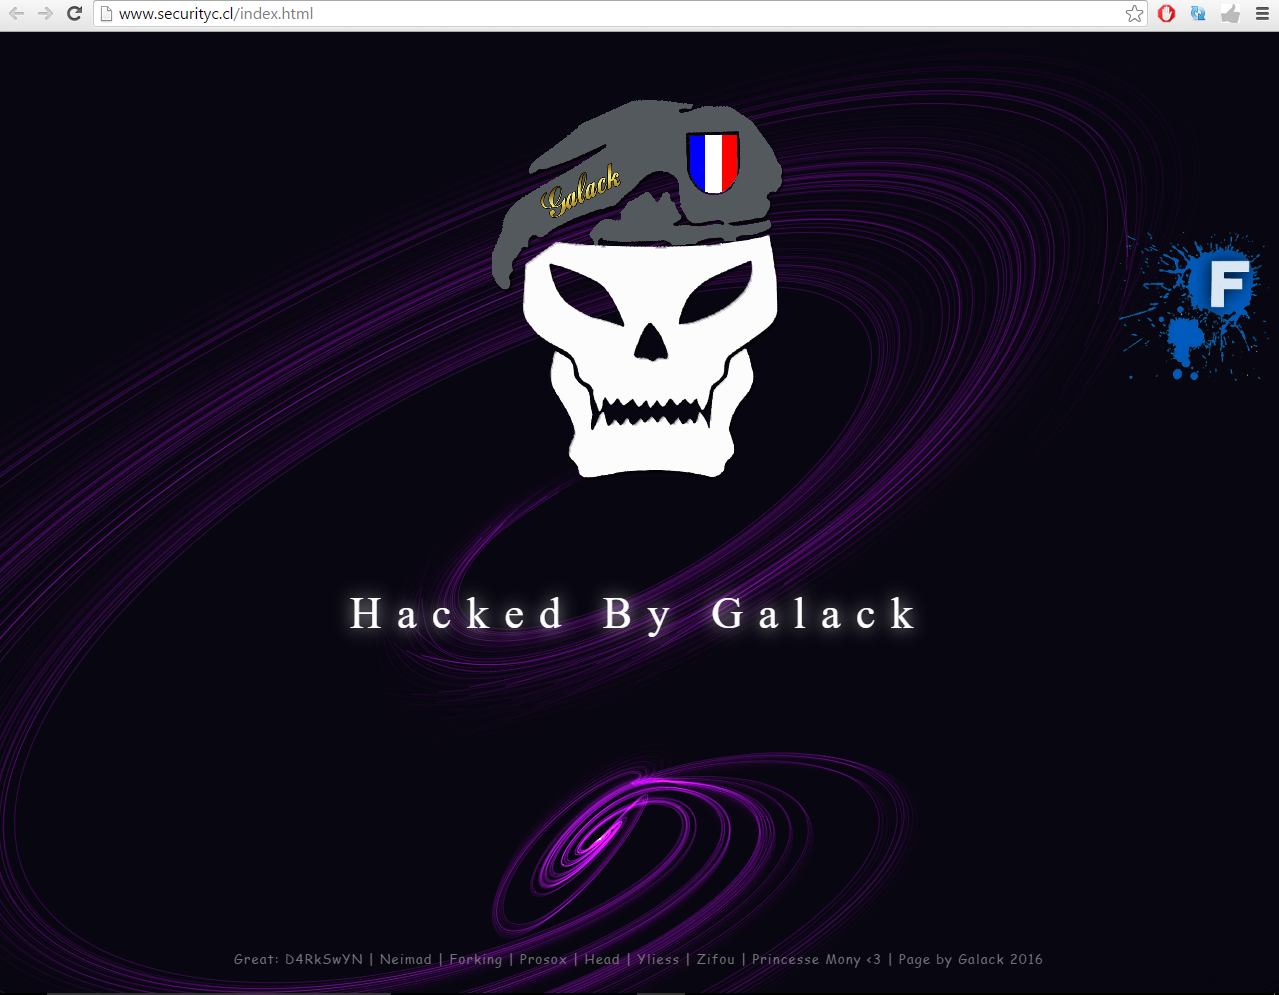 Hacked by Galack